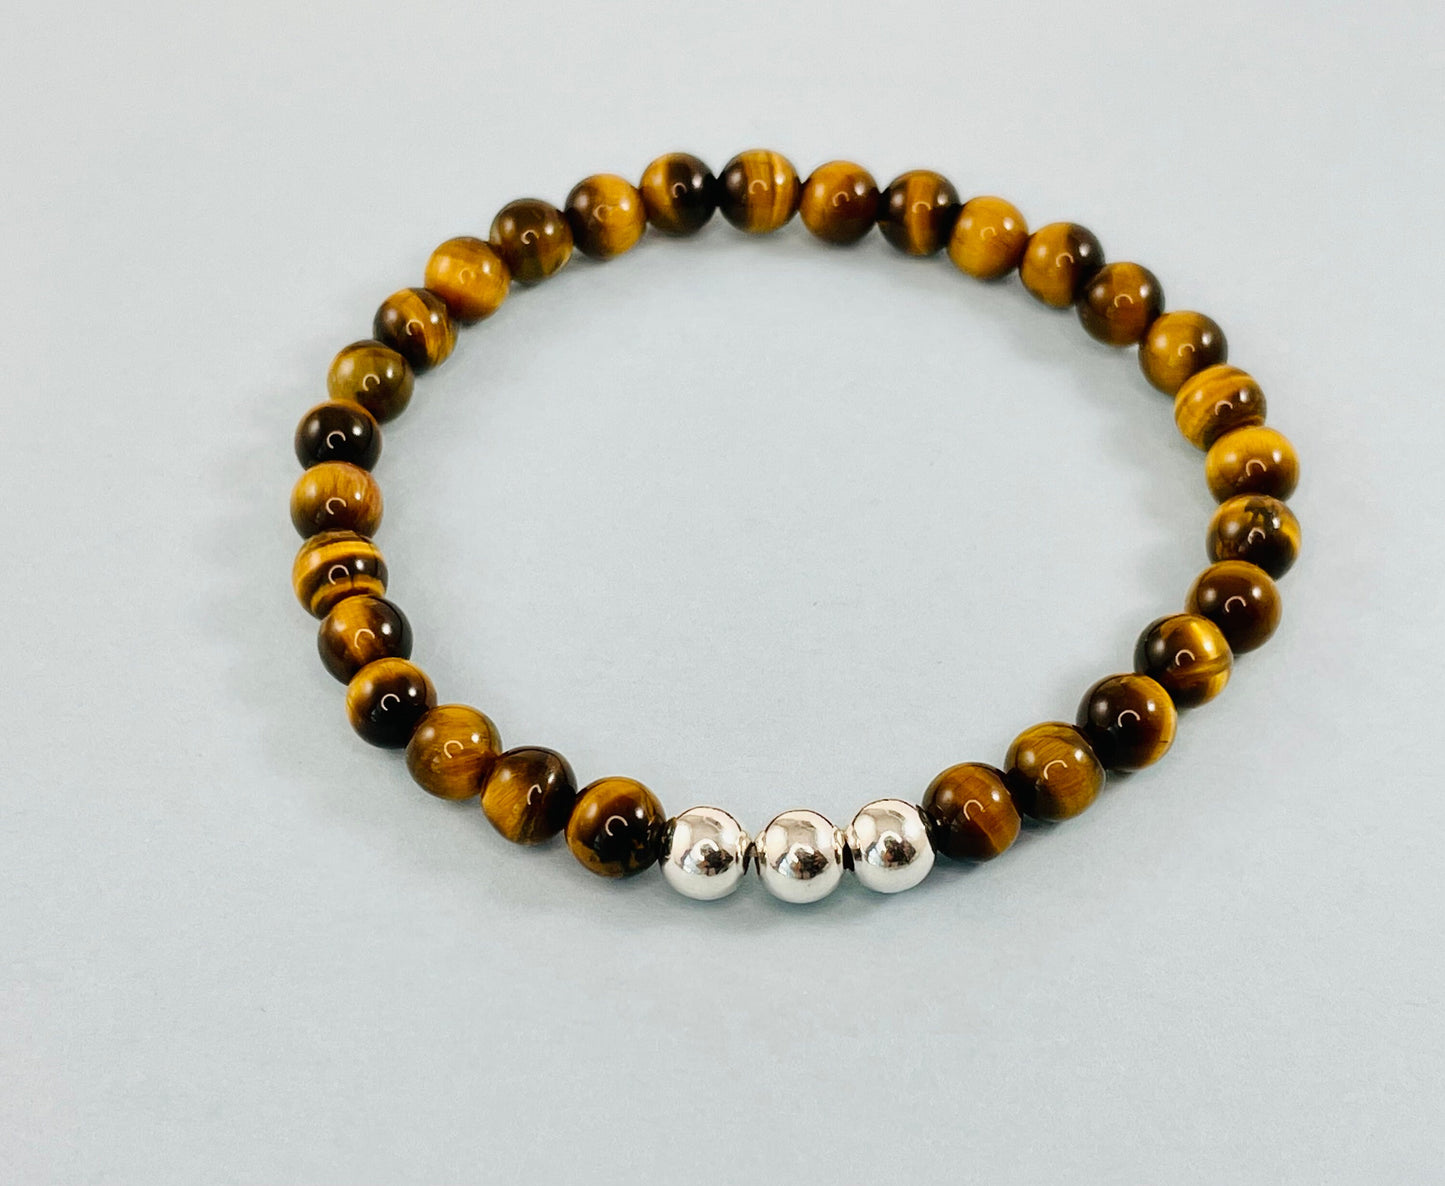 Sterling Silver Men's Man Minimalist Tiger Eye Gemstone Bracelet,Men's Jewelry Accessories Gift,Fathers Day Gift,Astrology Jewelry for Him